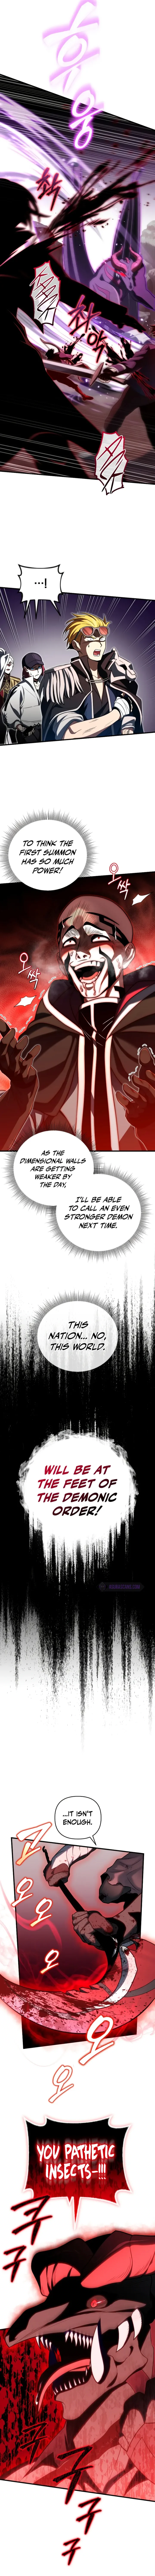 Player Who Returned 10,000 Years Later - Chapter 68 Page 7